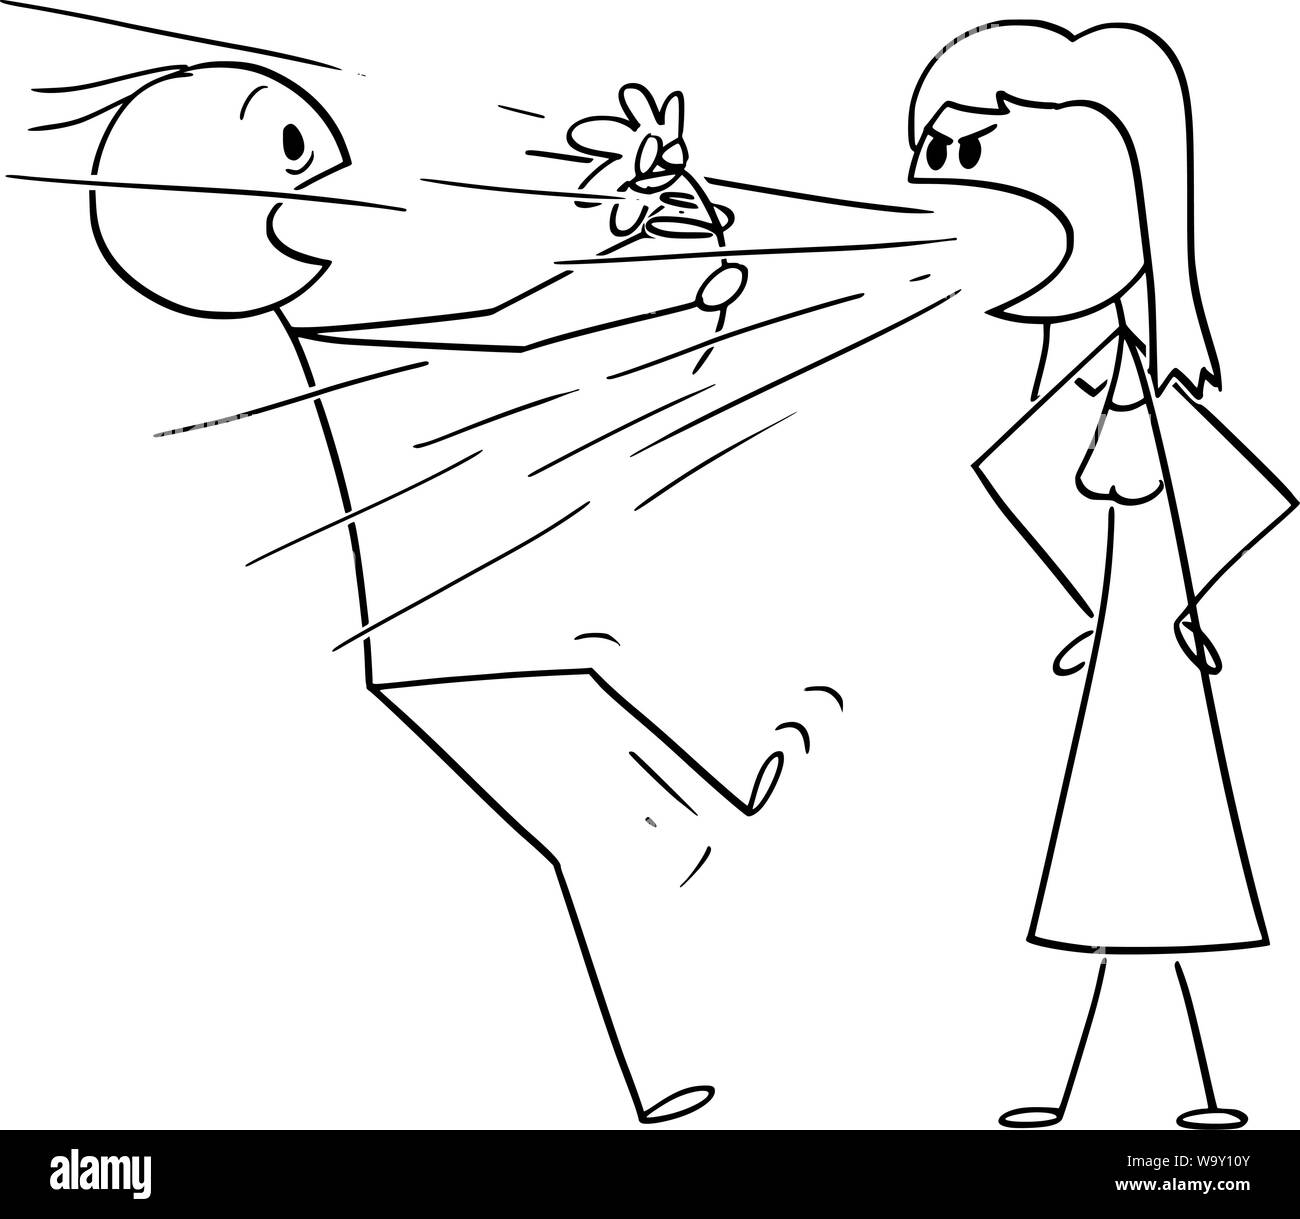 Vector cartoon stick figure drawing conceptual illustration of woman on date yelling or screaming at man holding a flower.Concept or couple relationship and love. Stock Vector